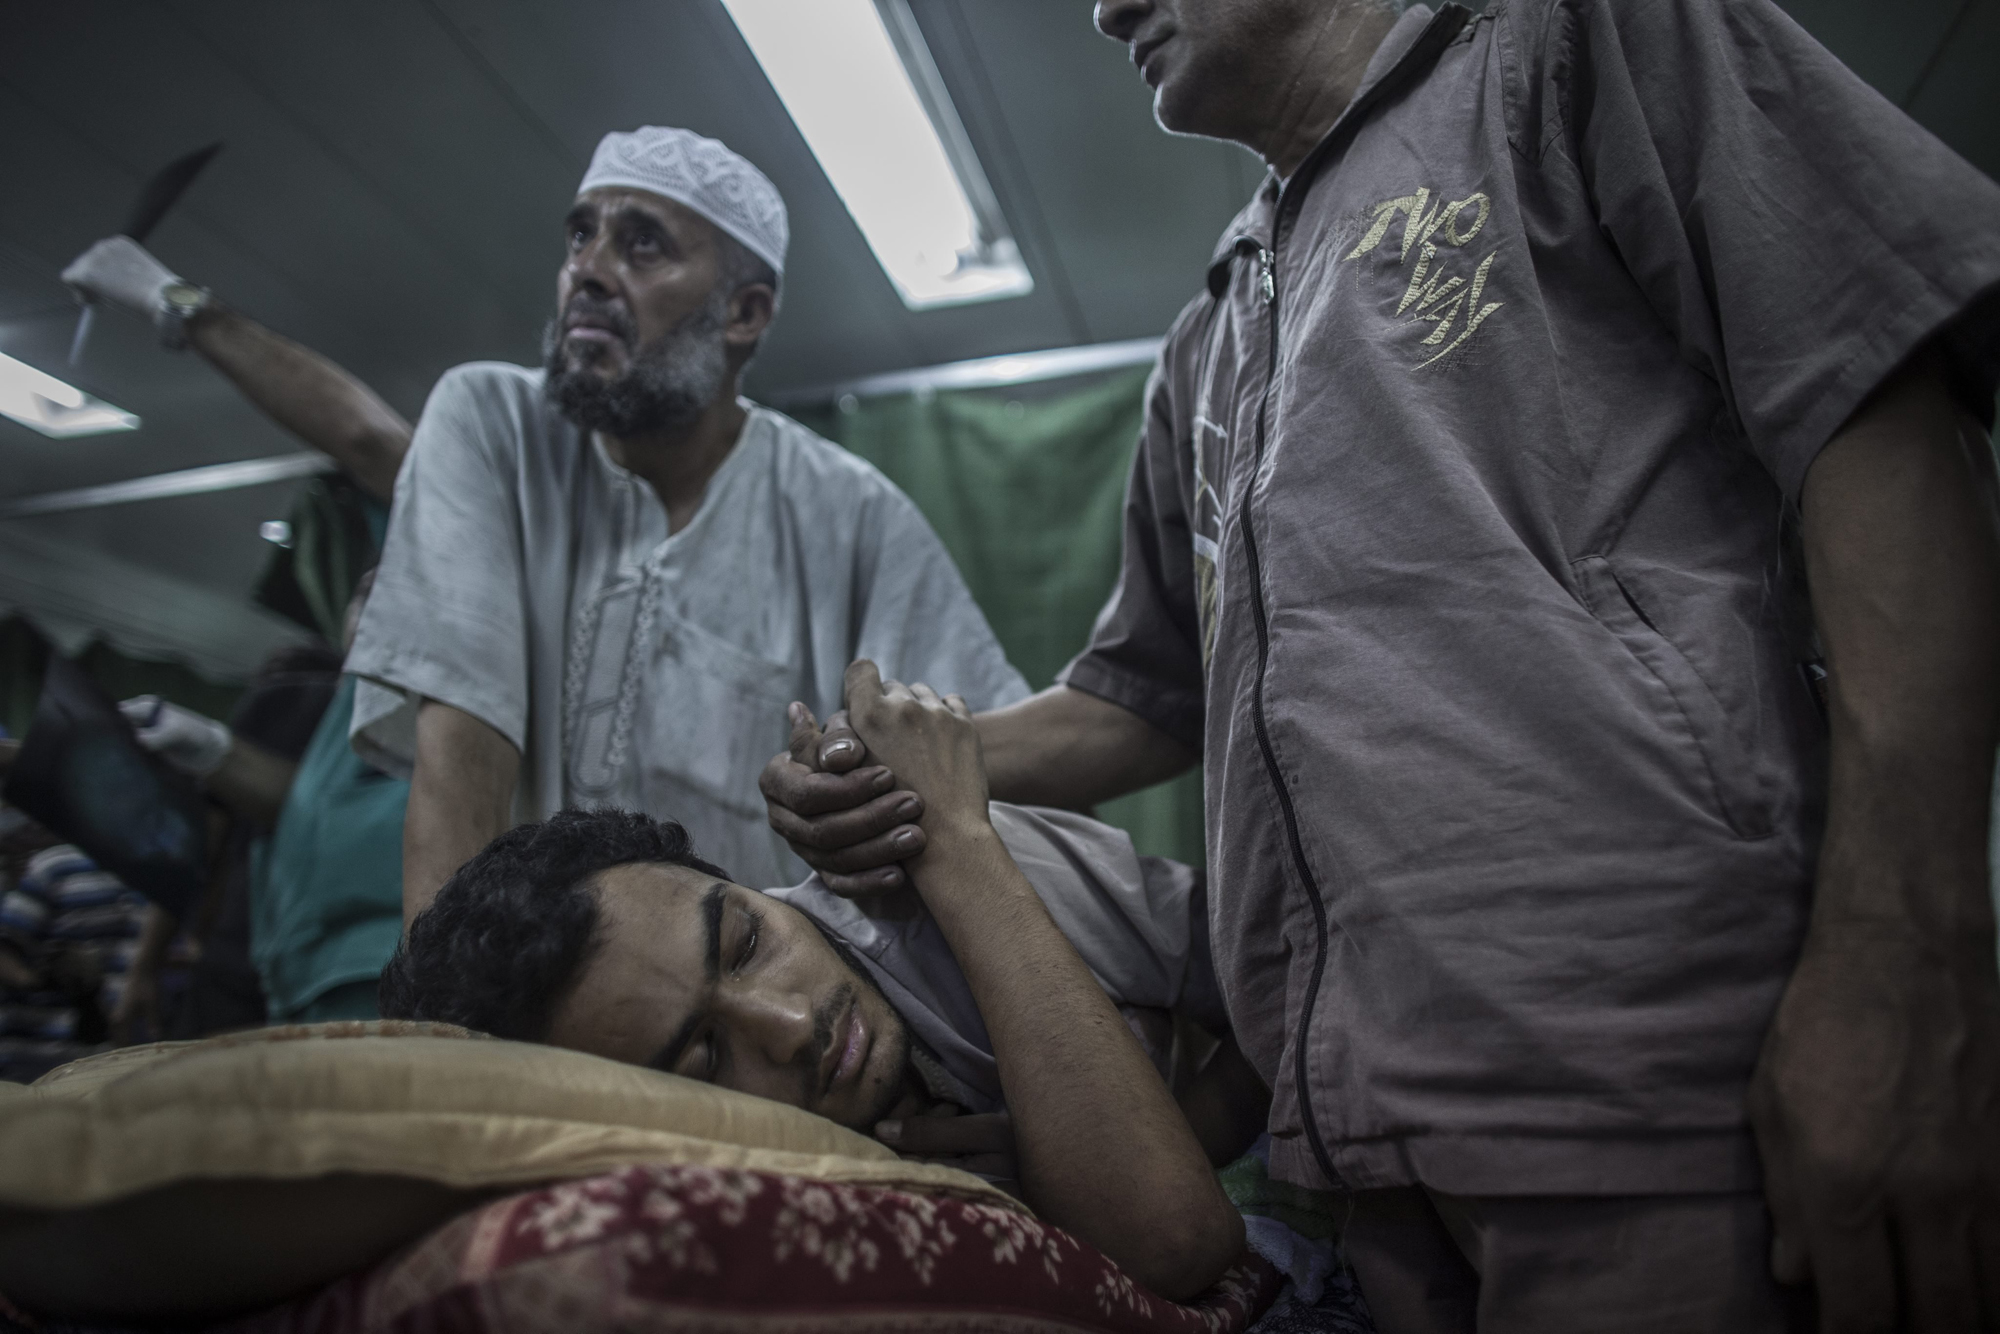 A relative holds the hand of a Palestinian man, who was injured when a UN school used as a shelter for internally displace people came under Israeli shelling, at the emergency room of the Kamal Adwan hospital in Beit Lahia, northern Gaza Strip, July 30, 2014.